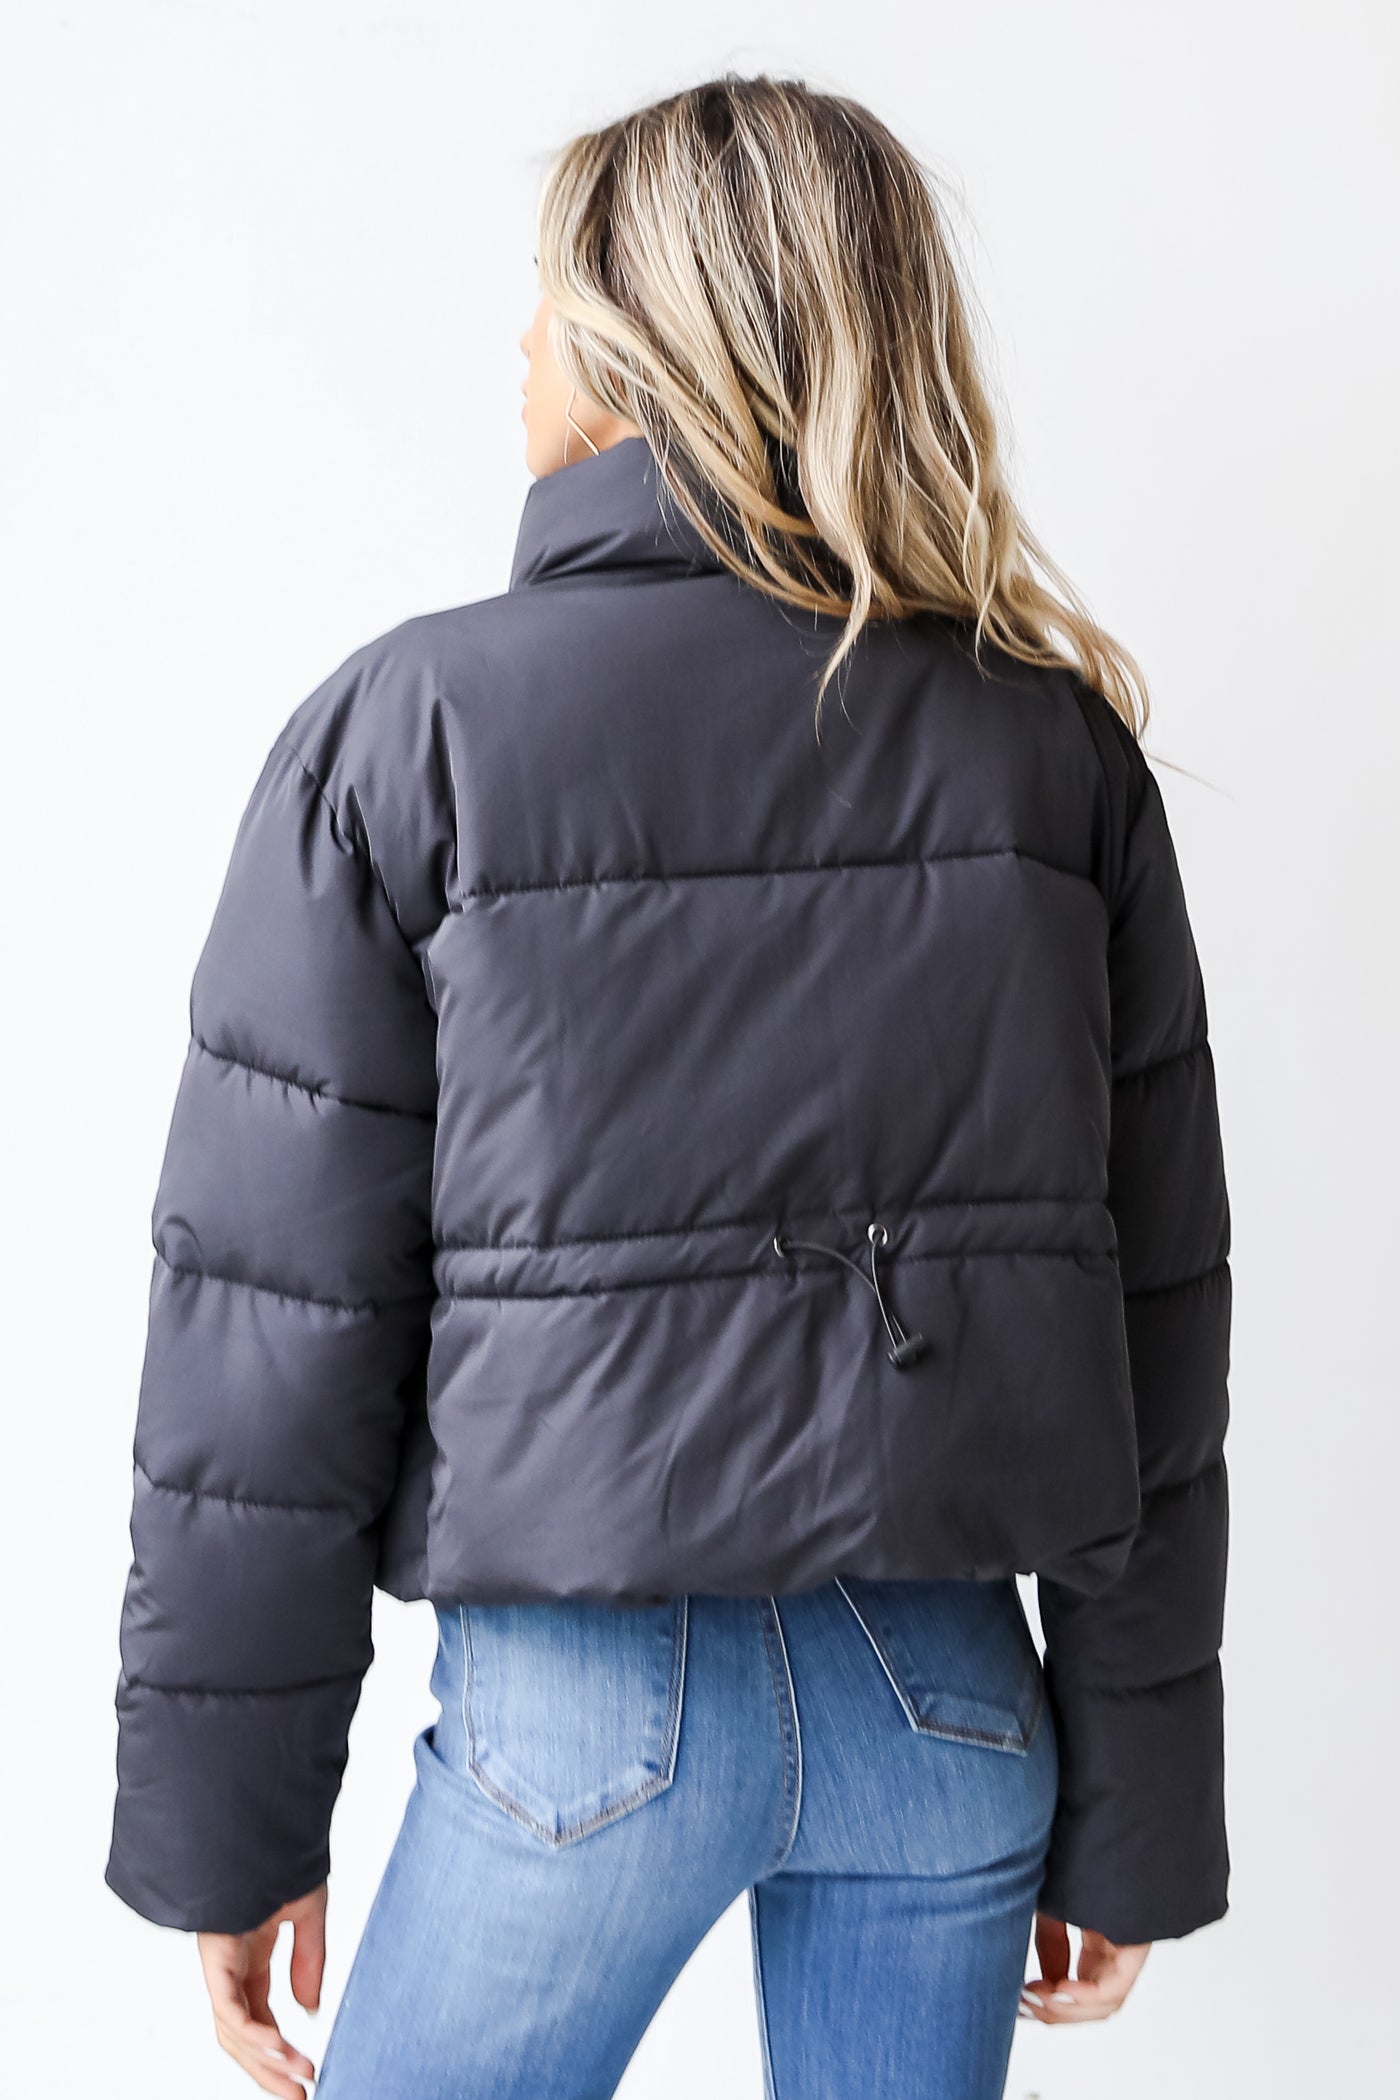 Puffer Jacket in black back view